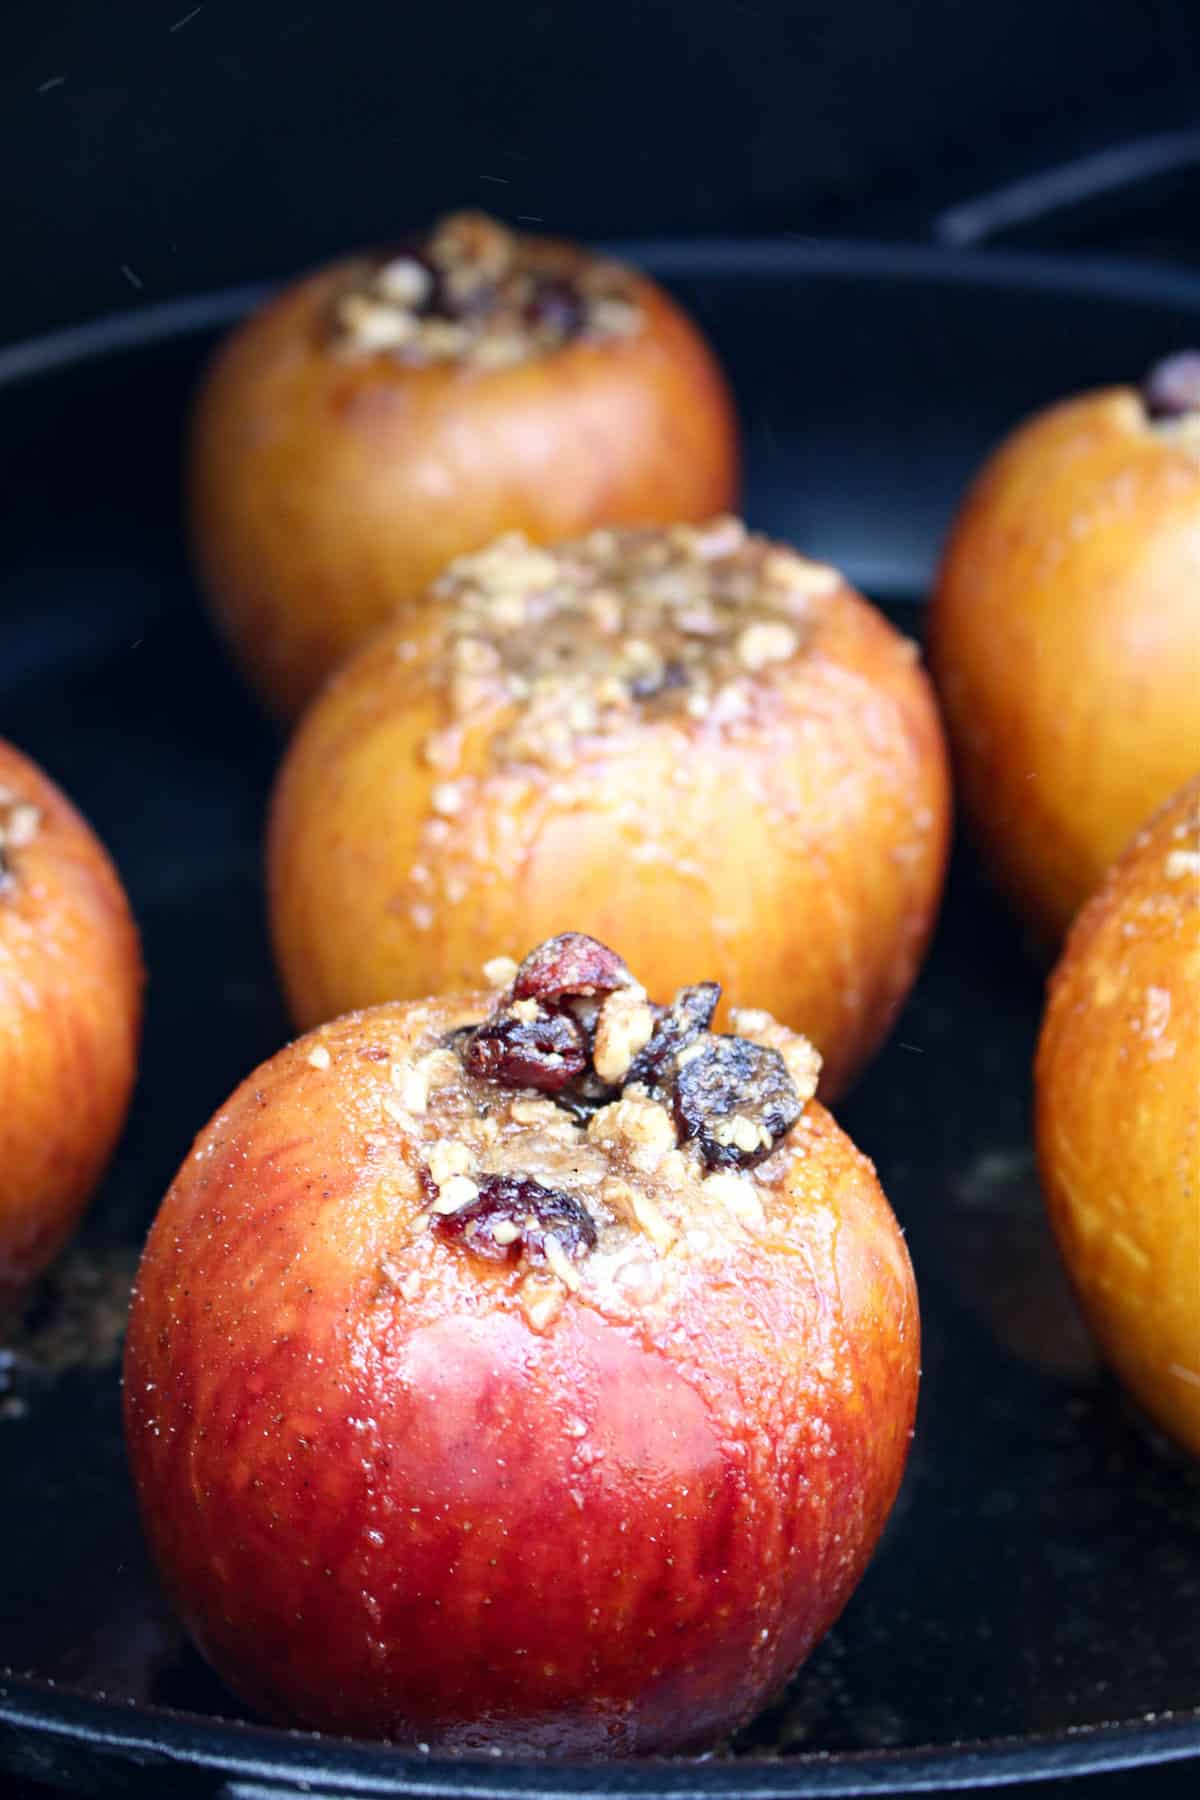 FIlled Apples for Smoked Apple Recipe on the Traeger